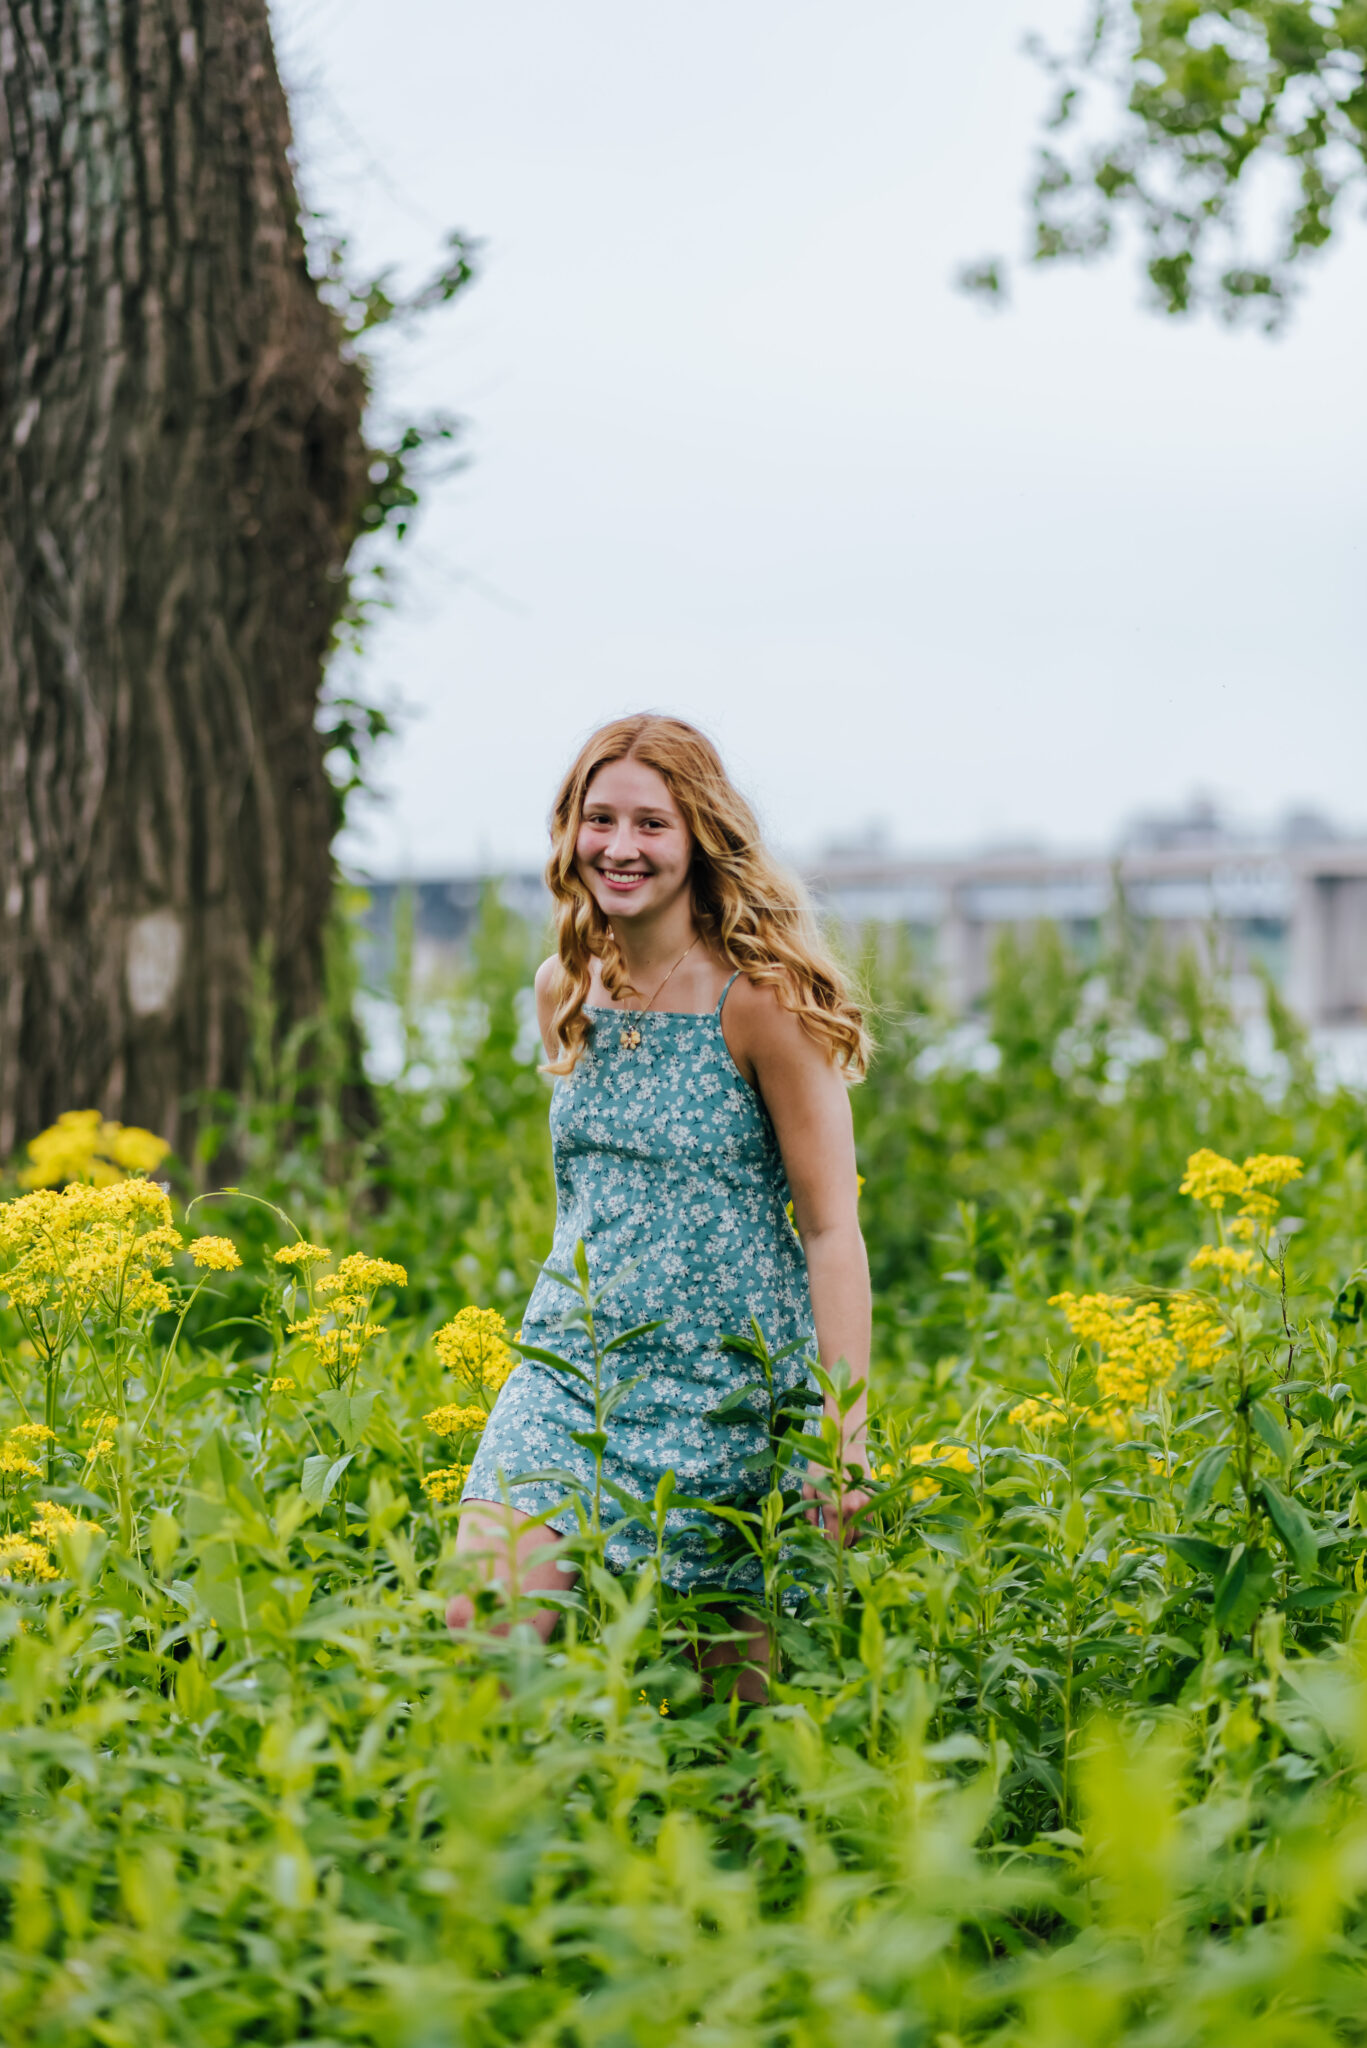 Redhead walks through tall grass and yellow flowers